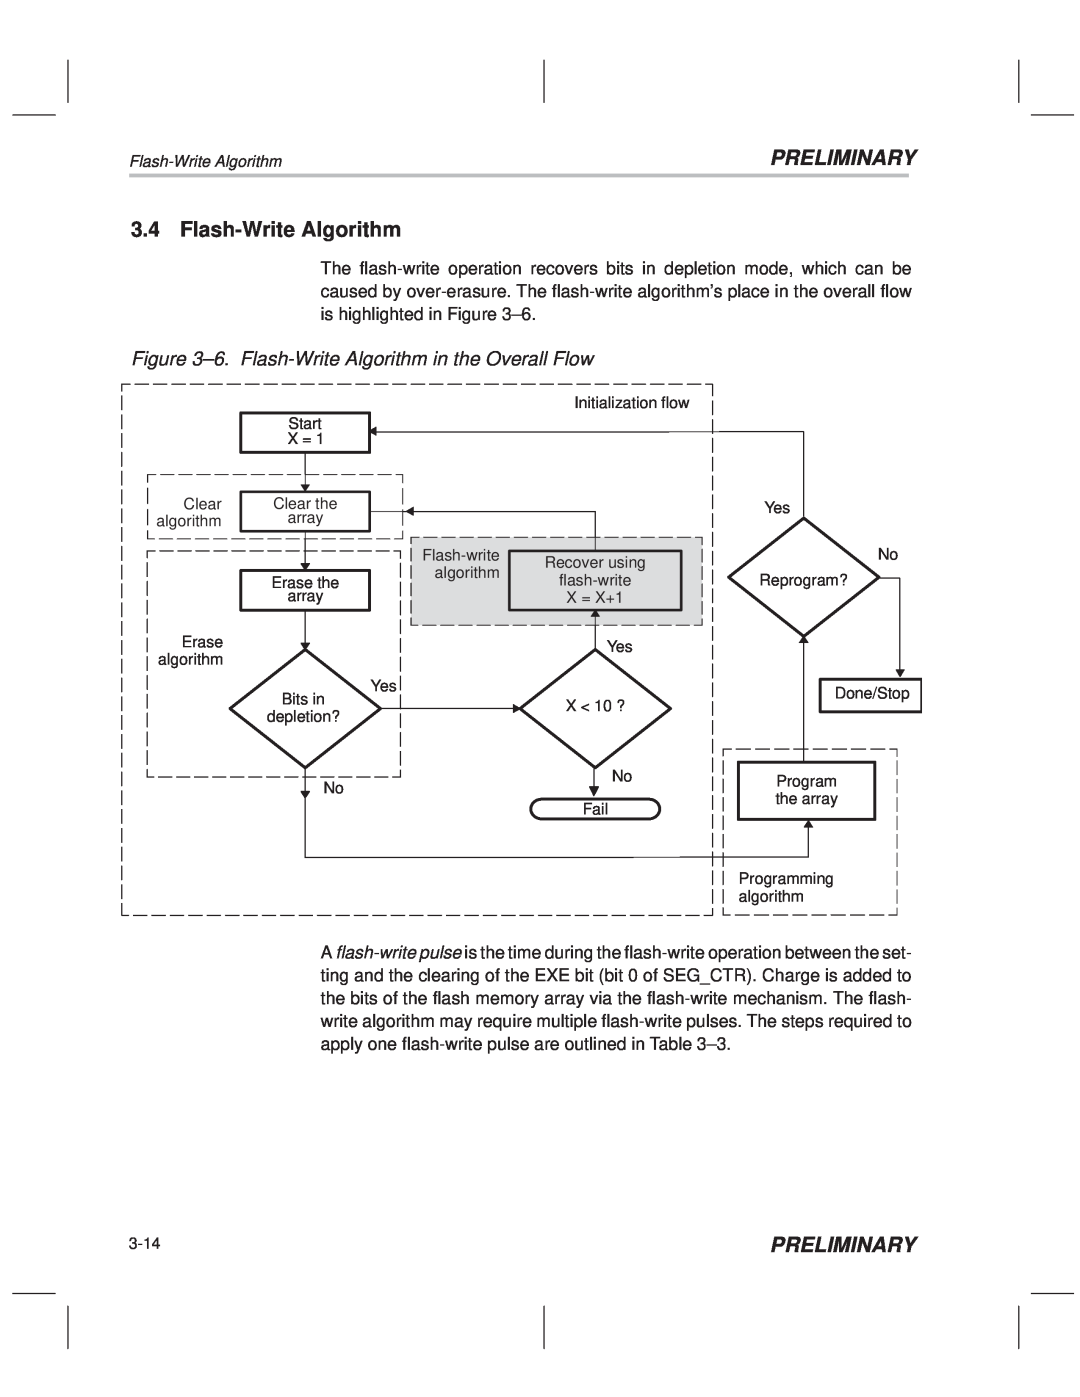 Texas Instruments TMS320F20x/F24x DSP manual ±6. Flash-Write Algorithm in the Overall Flow, Preliminary 